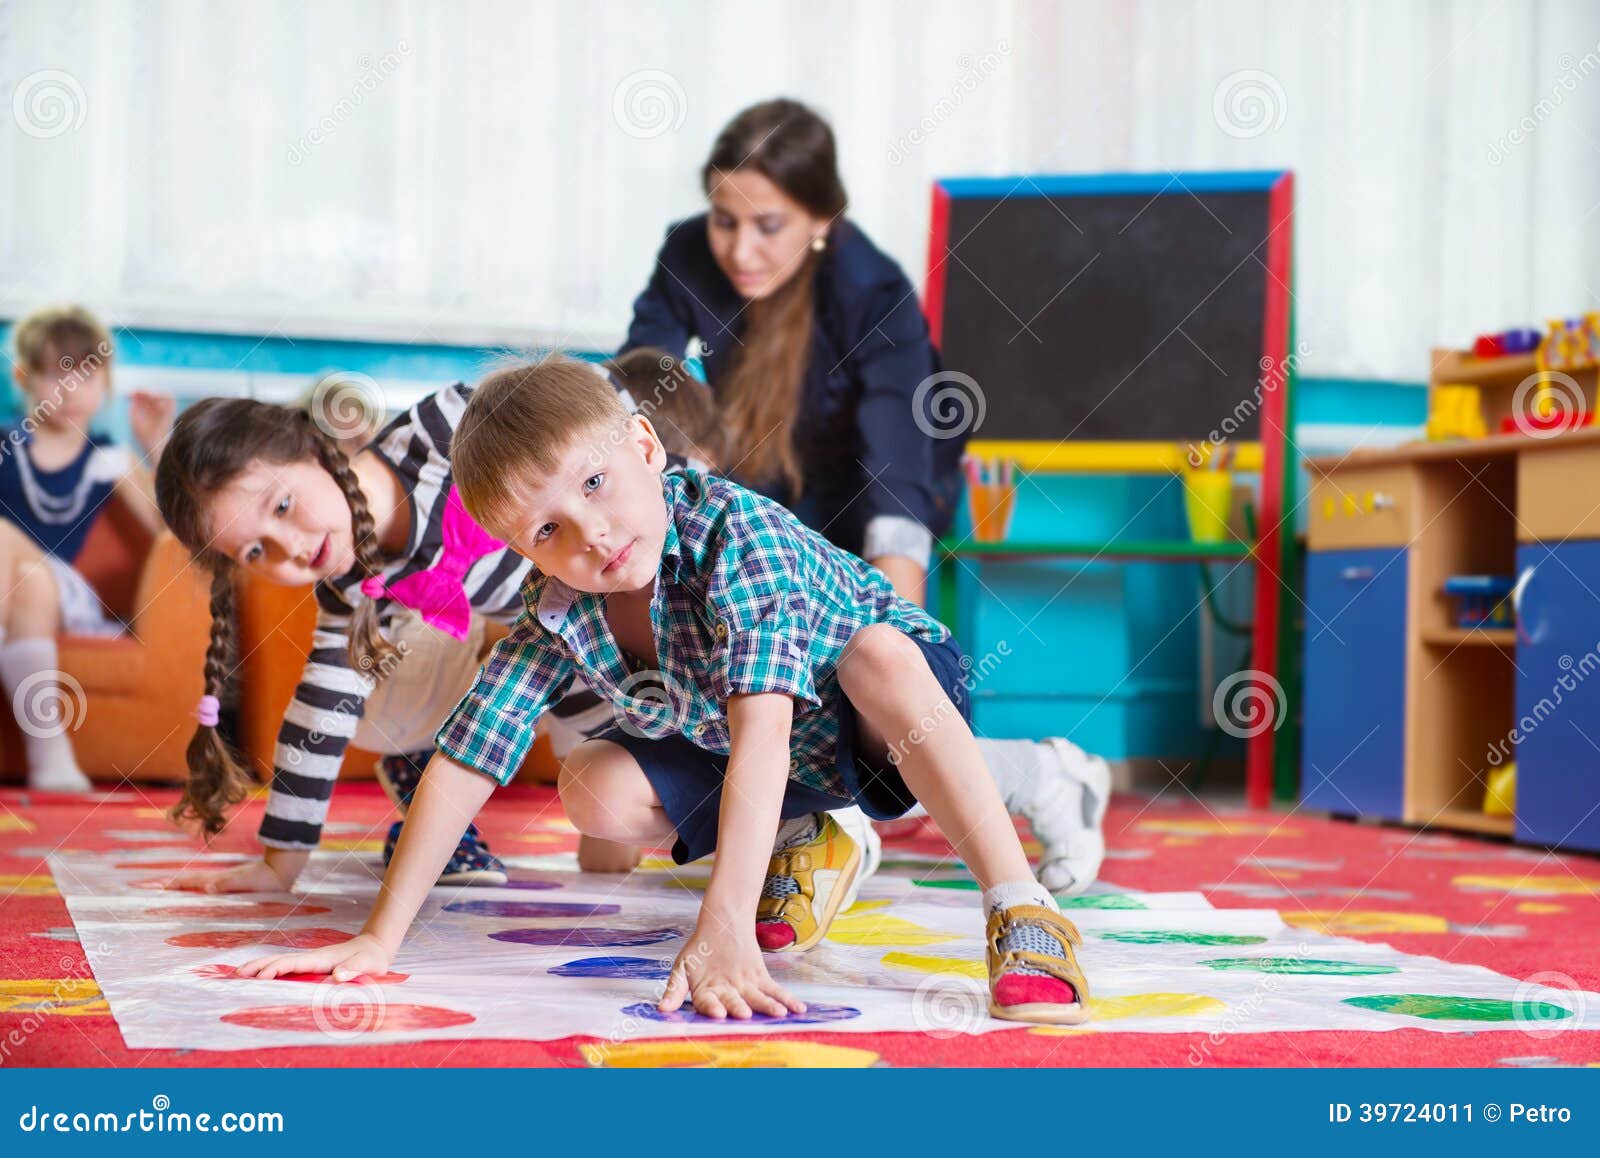 cute toddlers playing in twister game